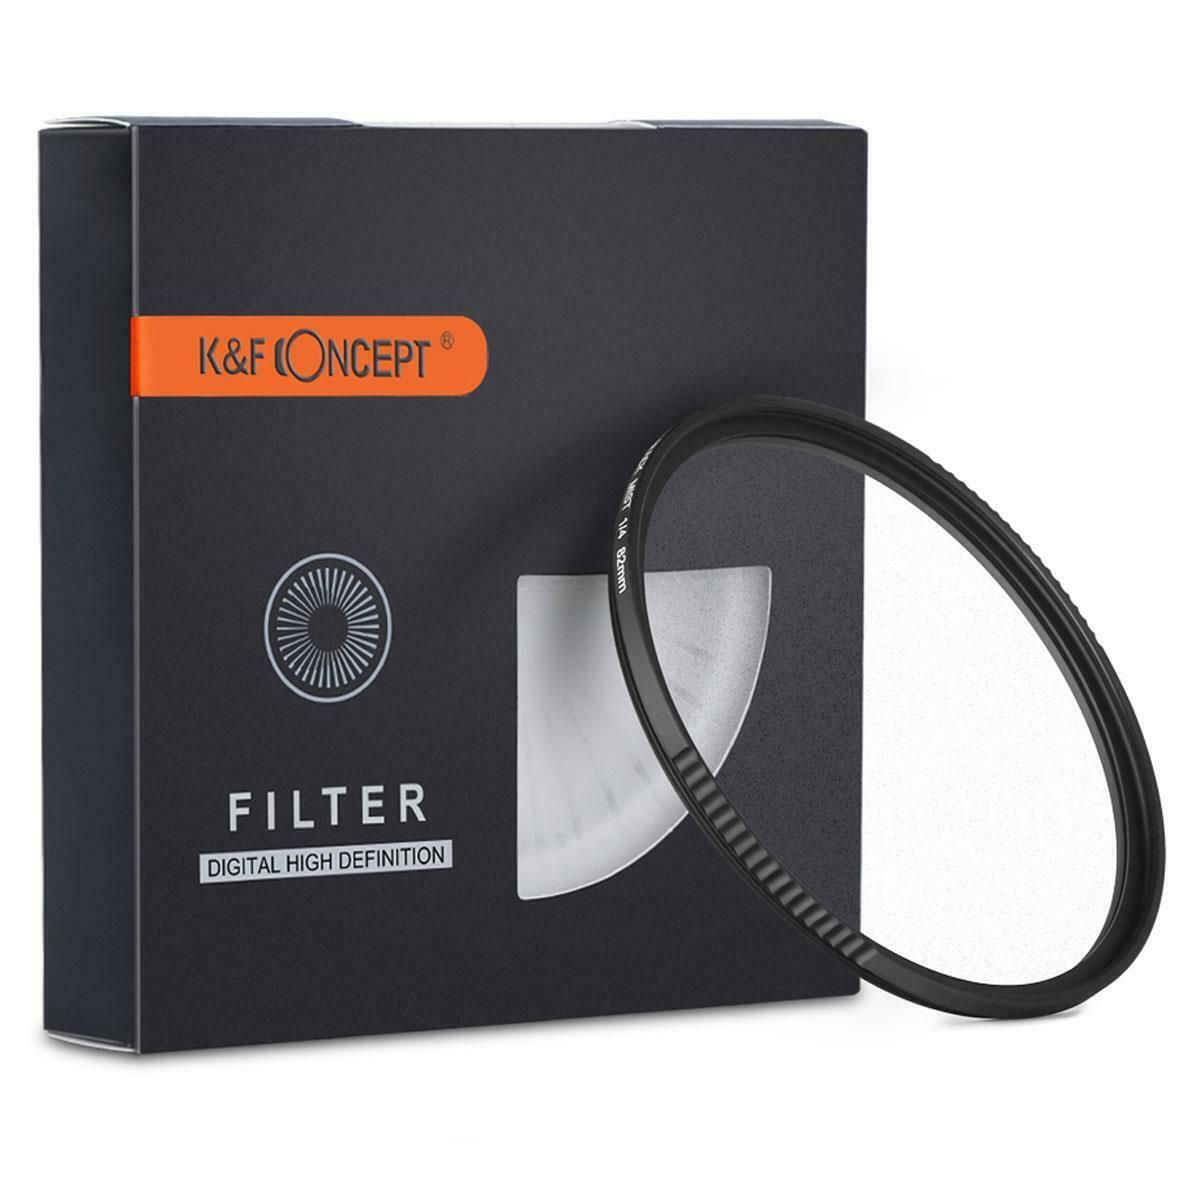 Product Image of K&F Concept Black Mist Filter 1/8 Special Effects Filter Multi Coated Waterproof Scratch-Resistant Anti-Reflection Nano-X Series